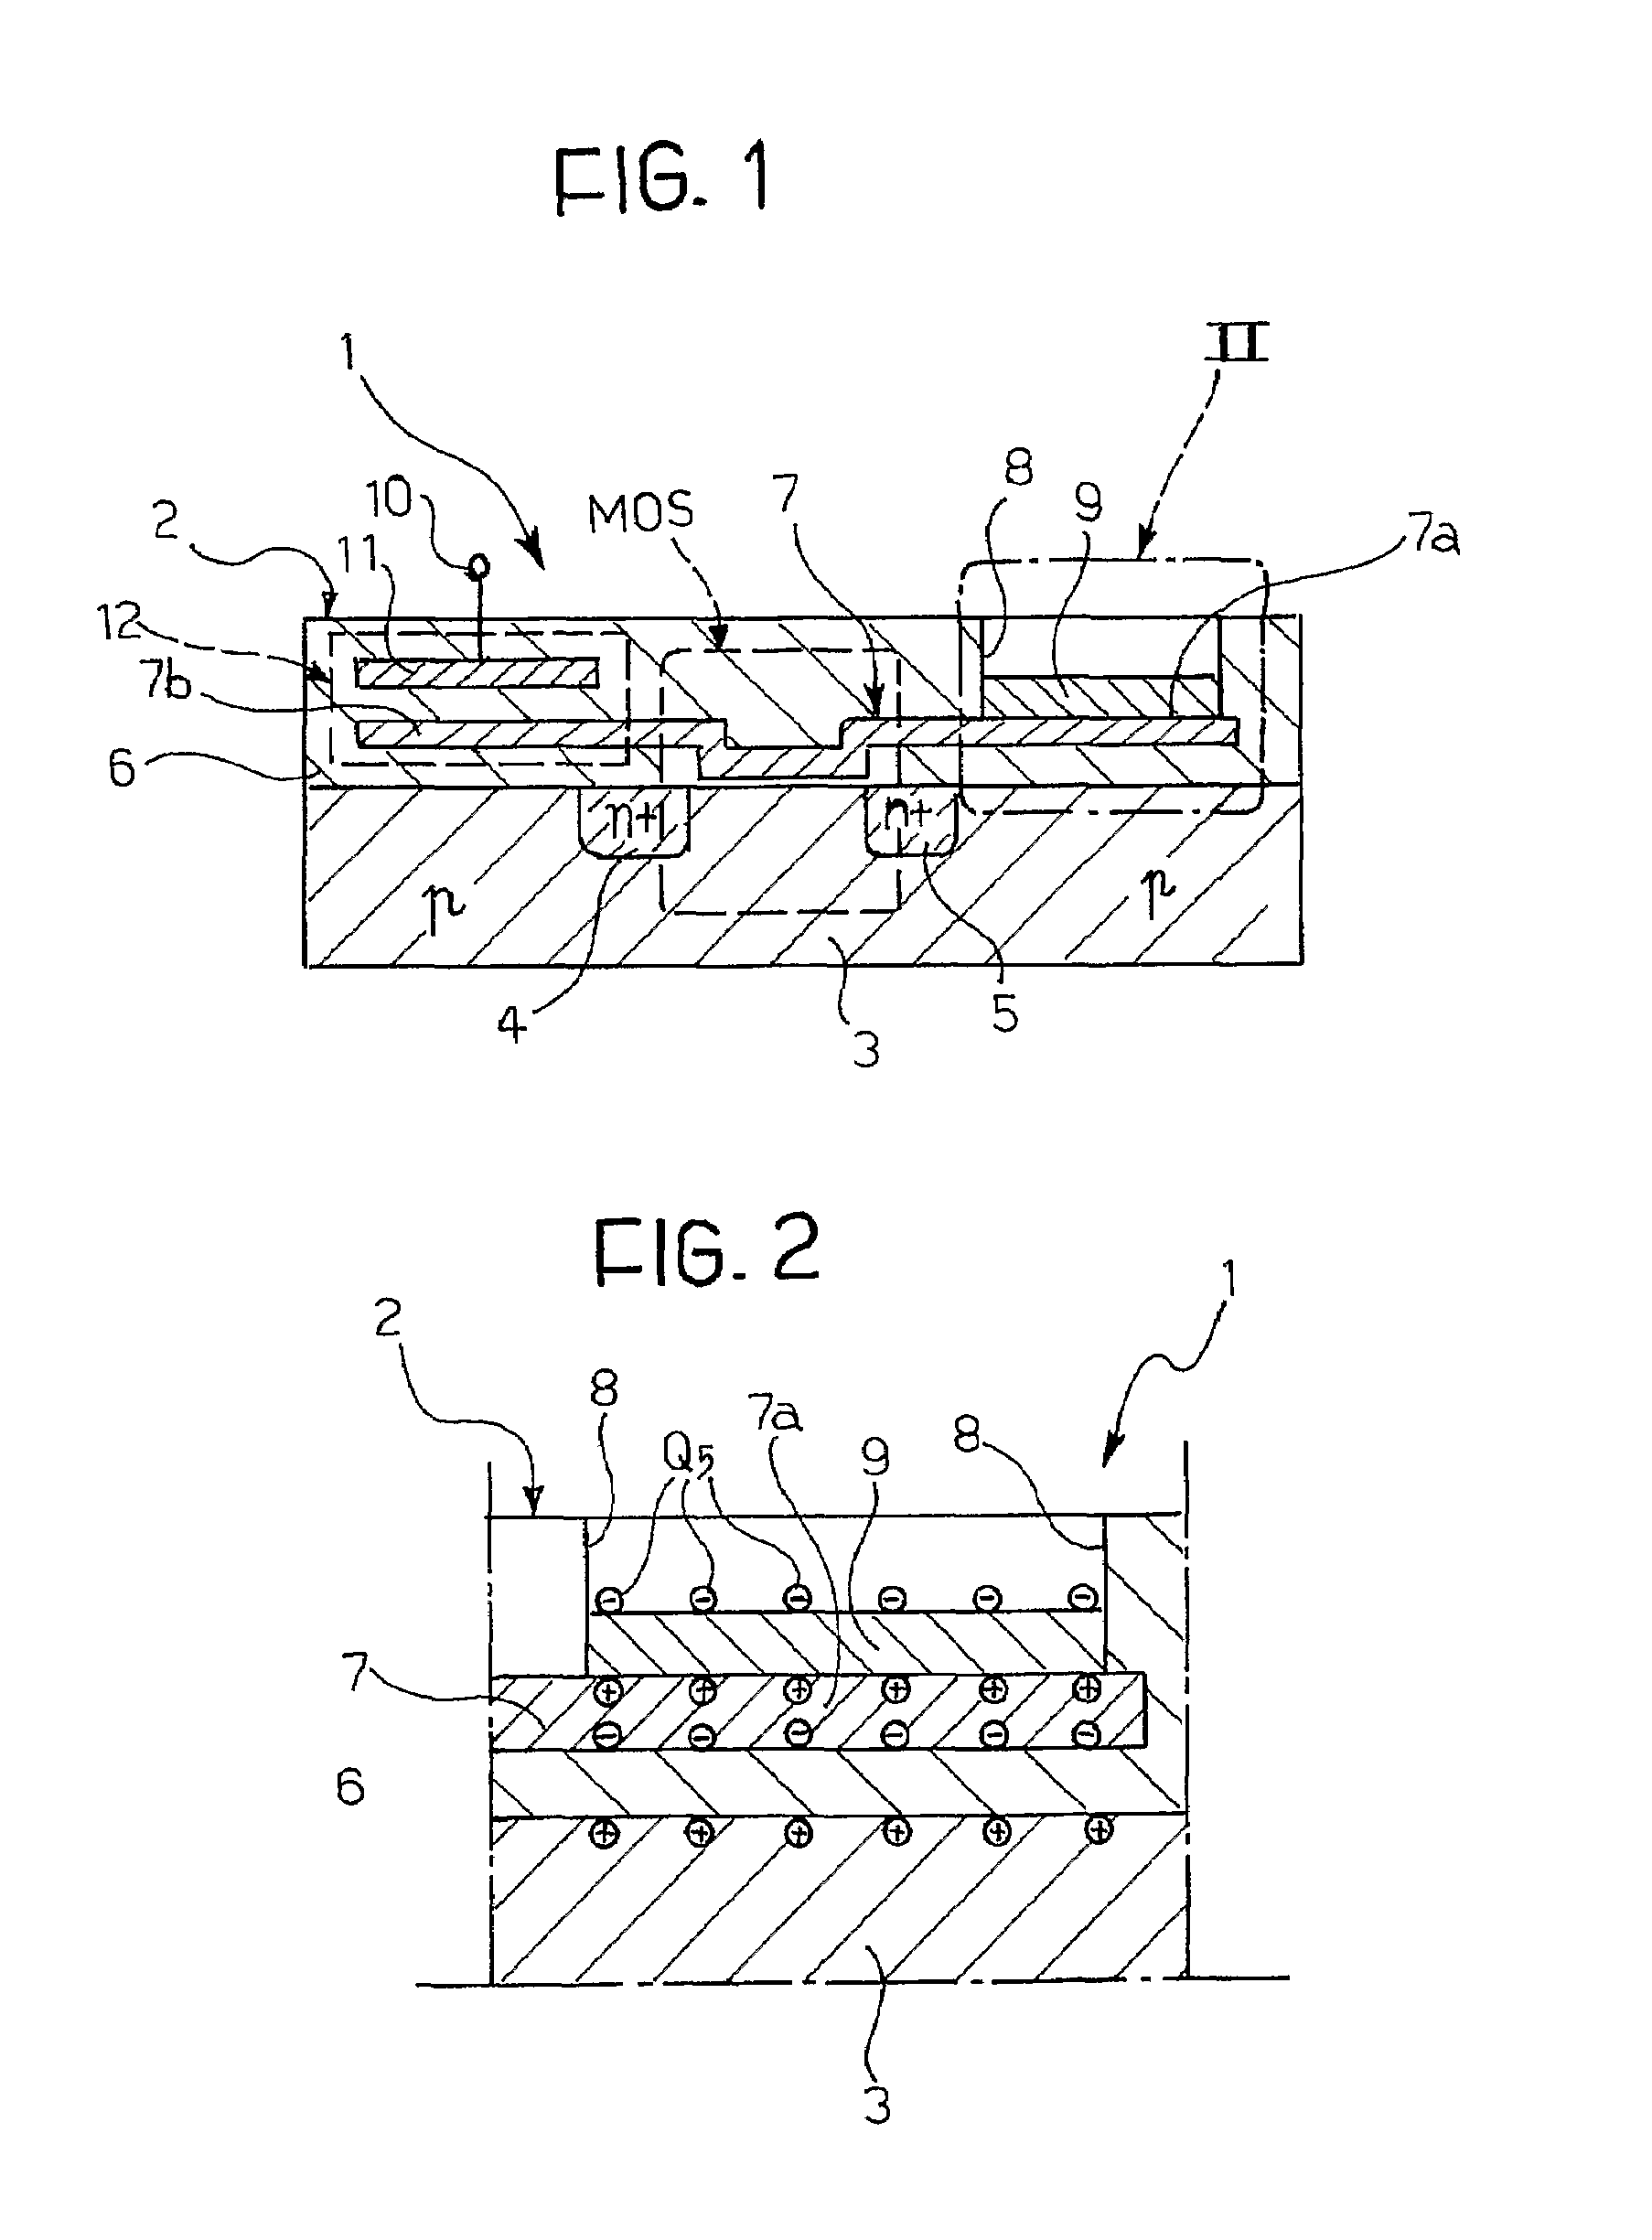 Field-effect device for the detection of small quantities of electric charge, such as those generated in bio-molecular process, bound in the vicinity of the surface